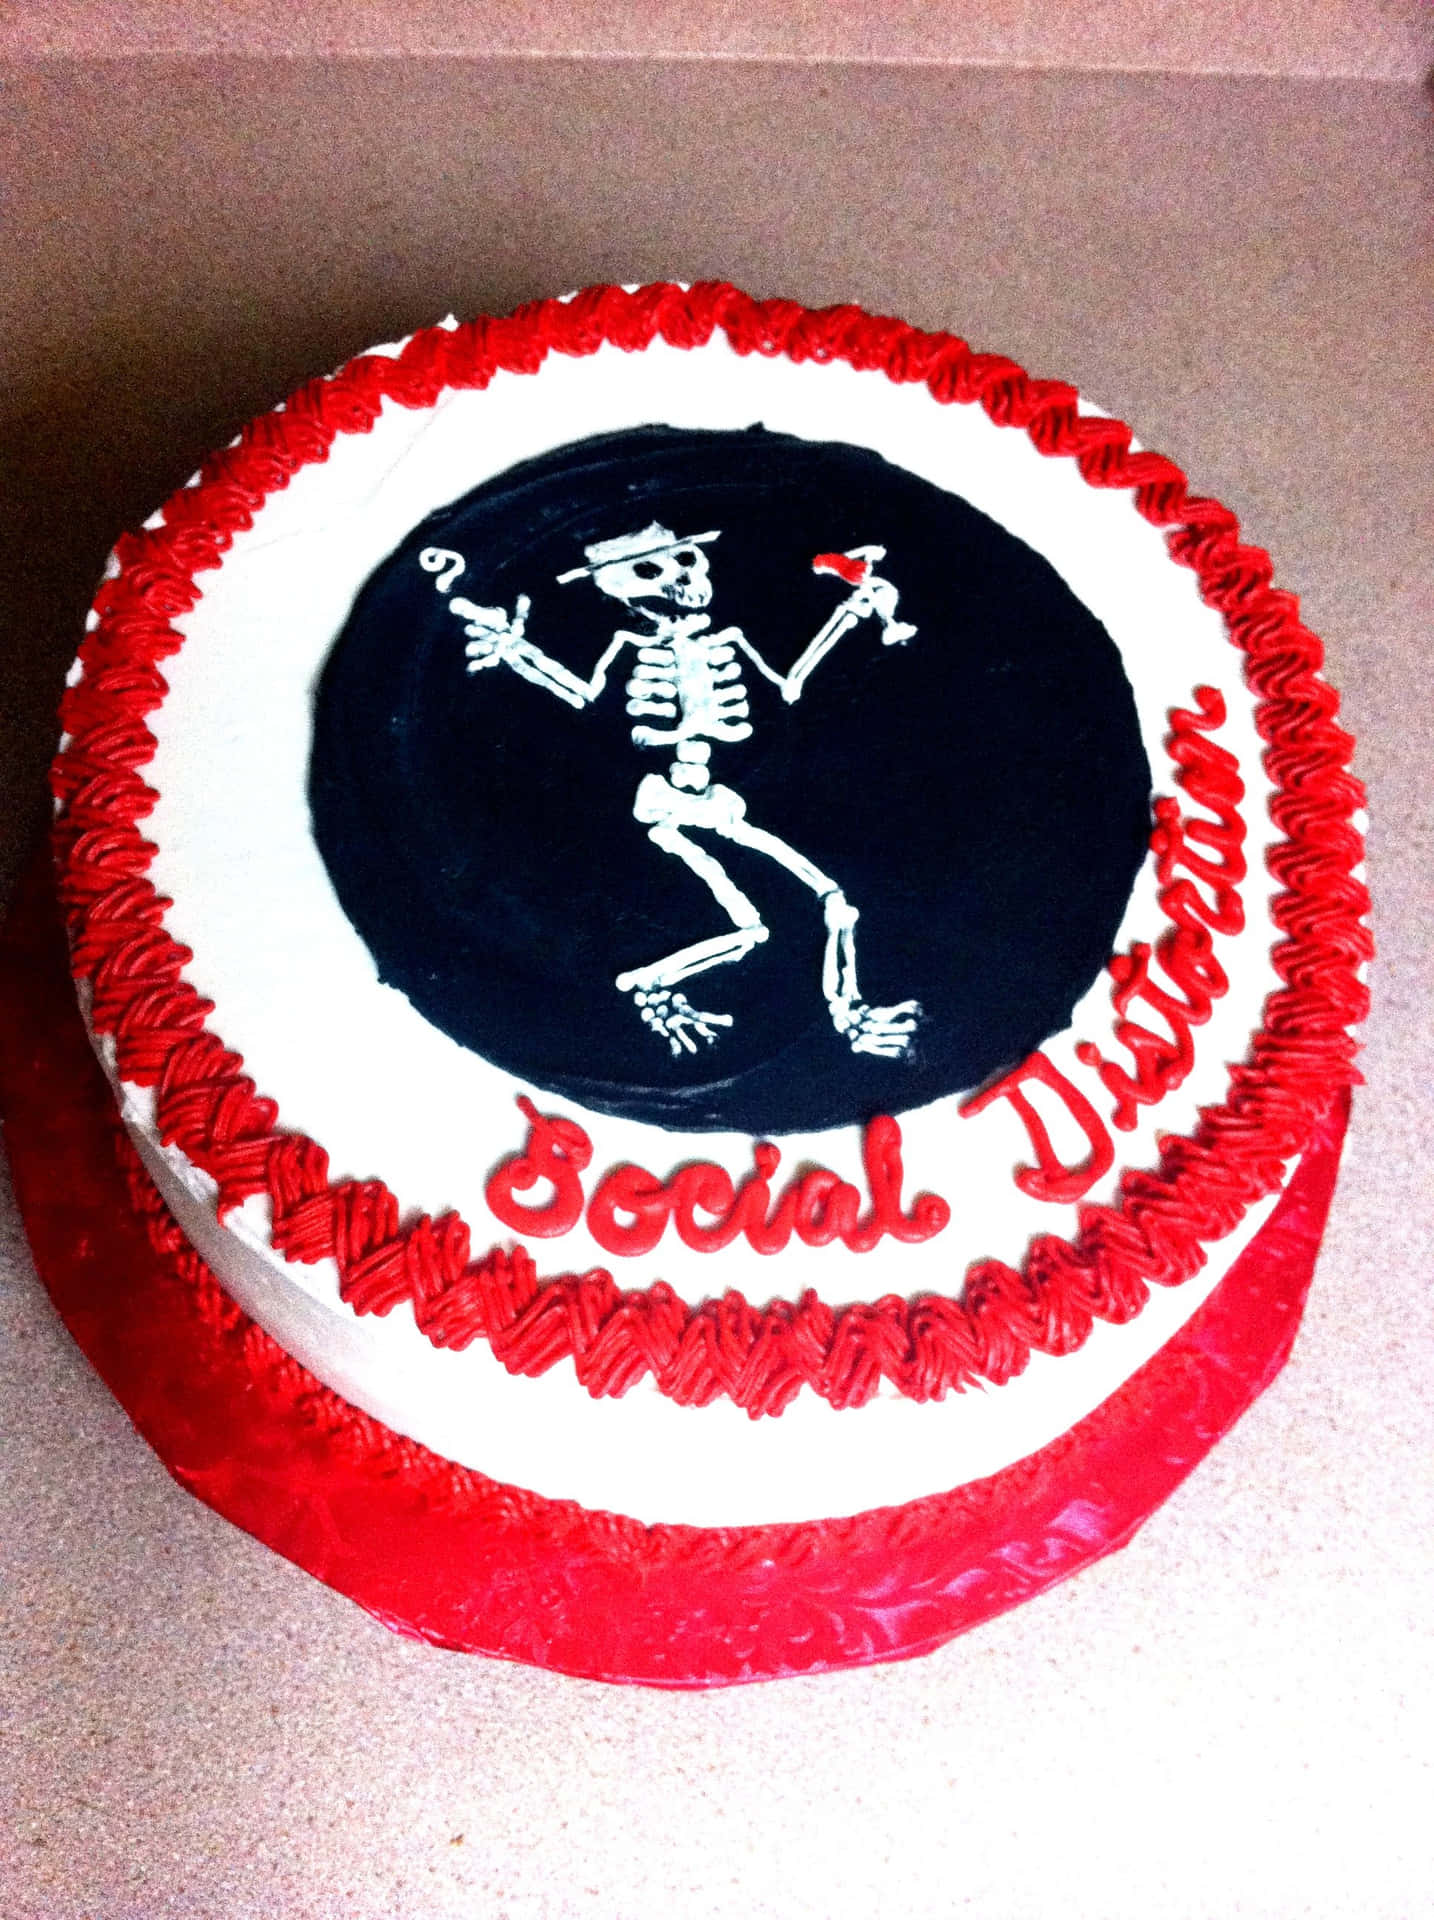 Social Distortion White With Red Cake Background